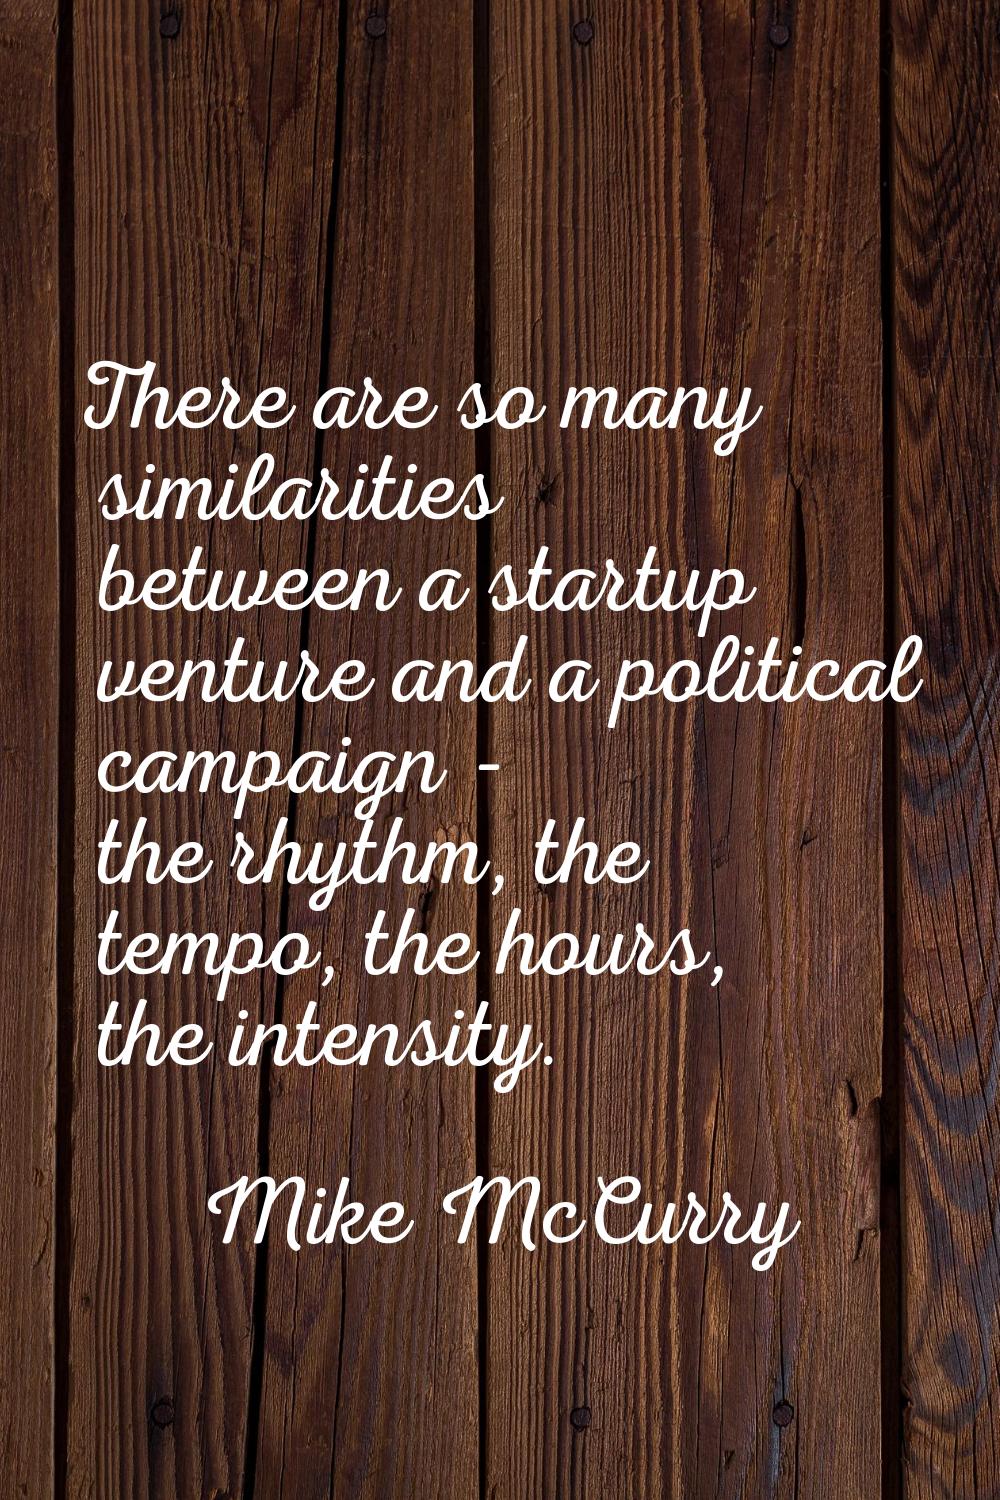 There are so many similarities between a startup venture and a political campaign - the rhythm, the